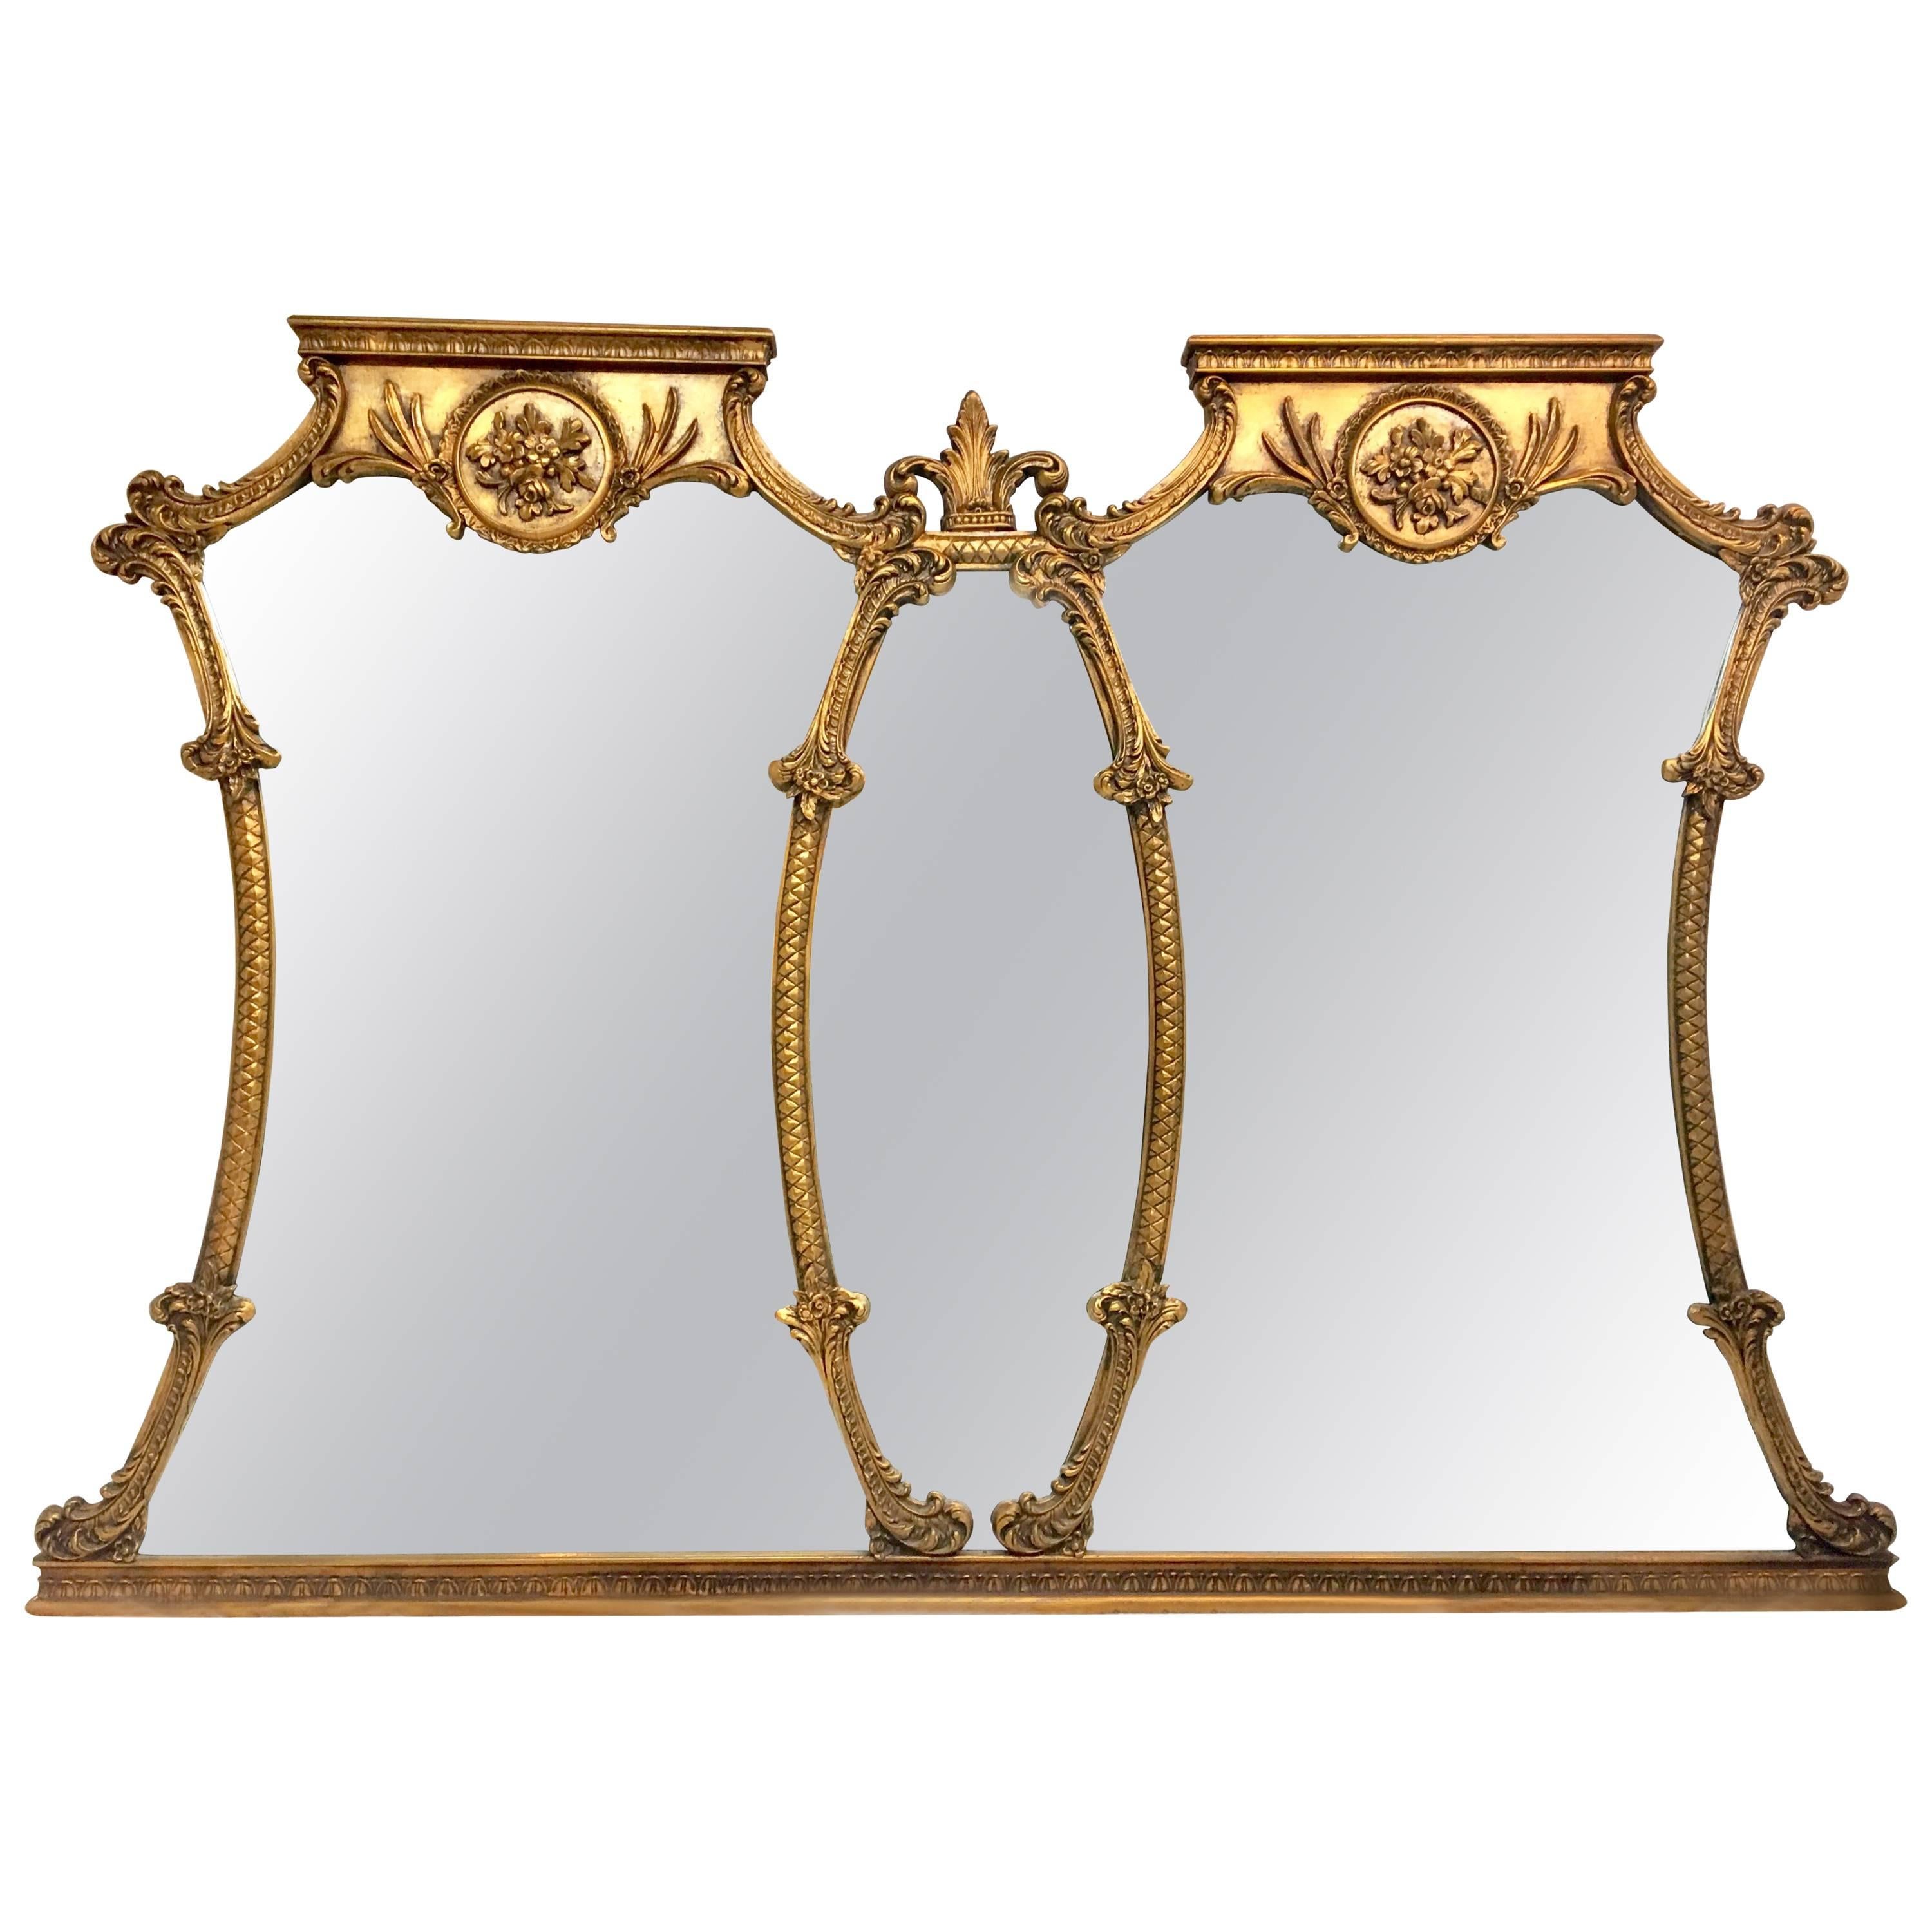 Mid-20th Century Monumental French Style Carved Gilt Wood Triptych Wall Mirror